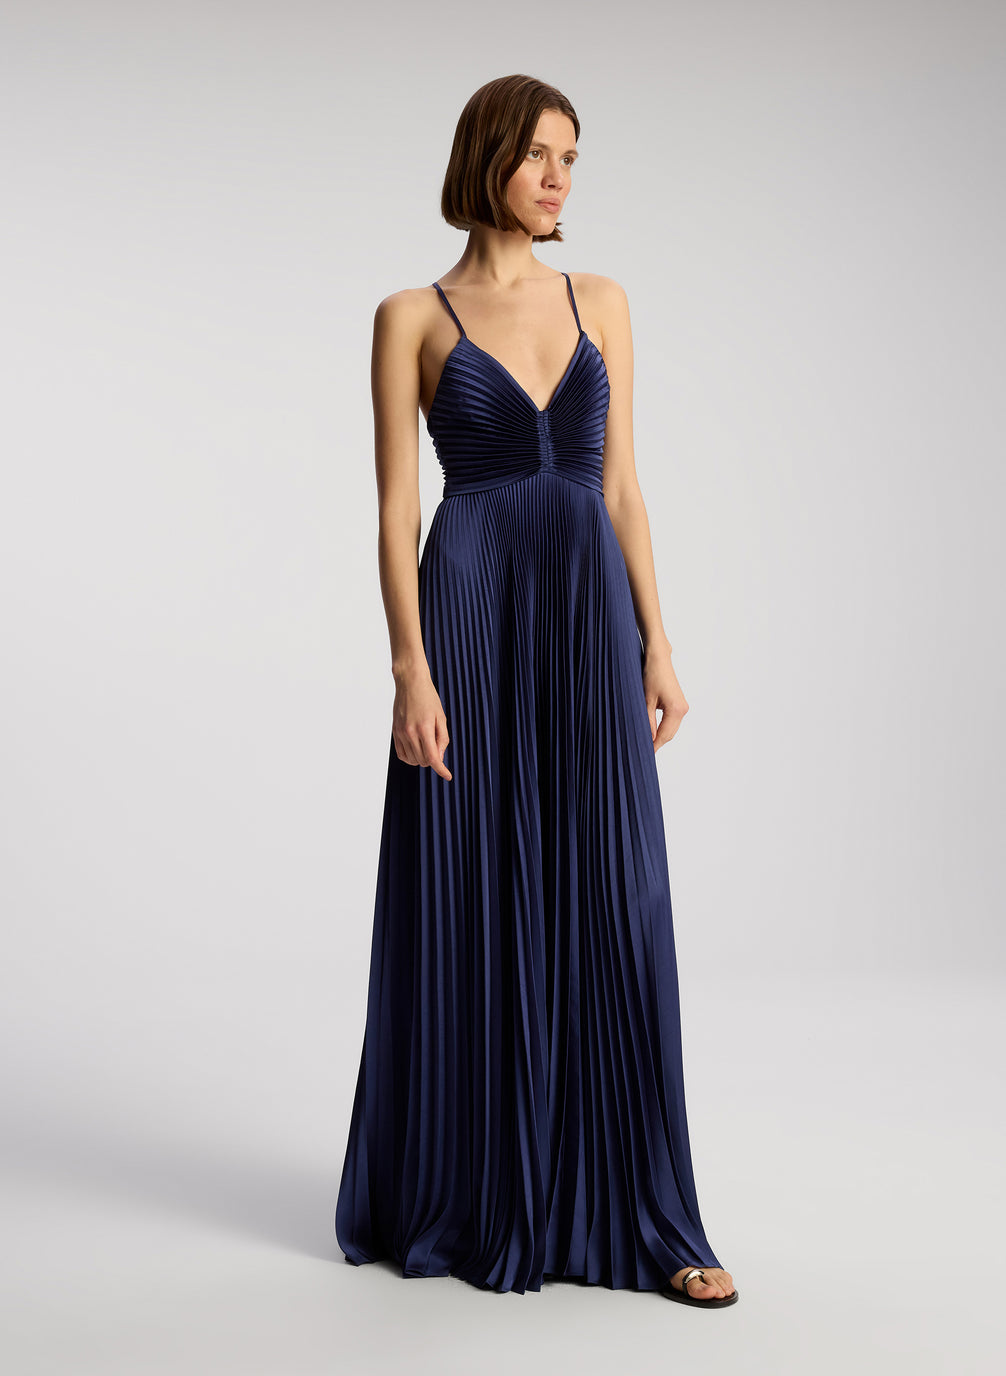 side view of woman wearing navy blue pleated maxi dress